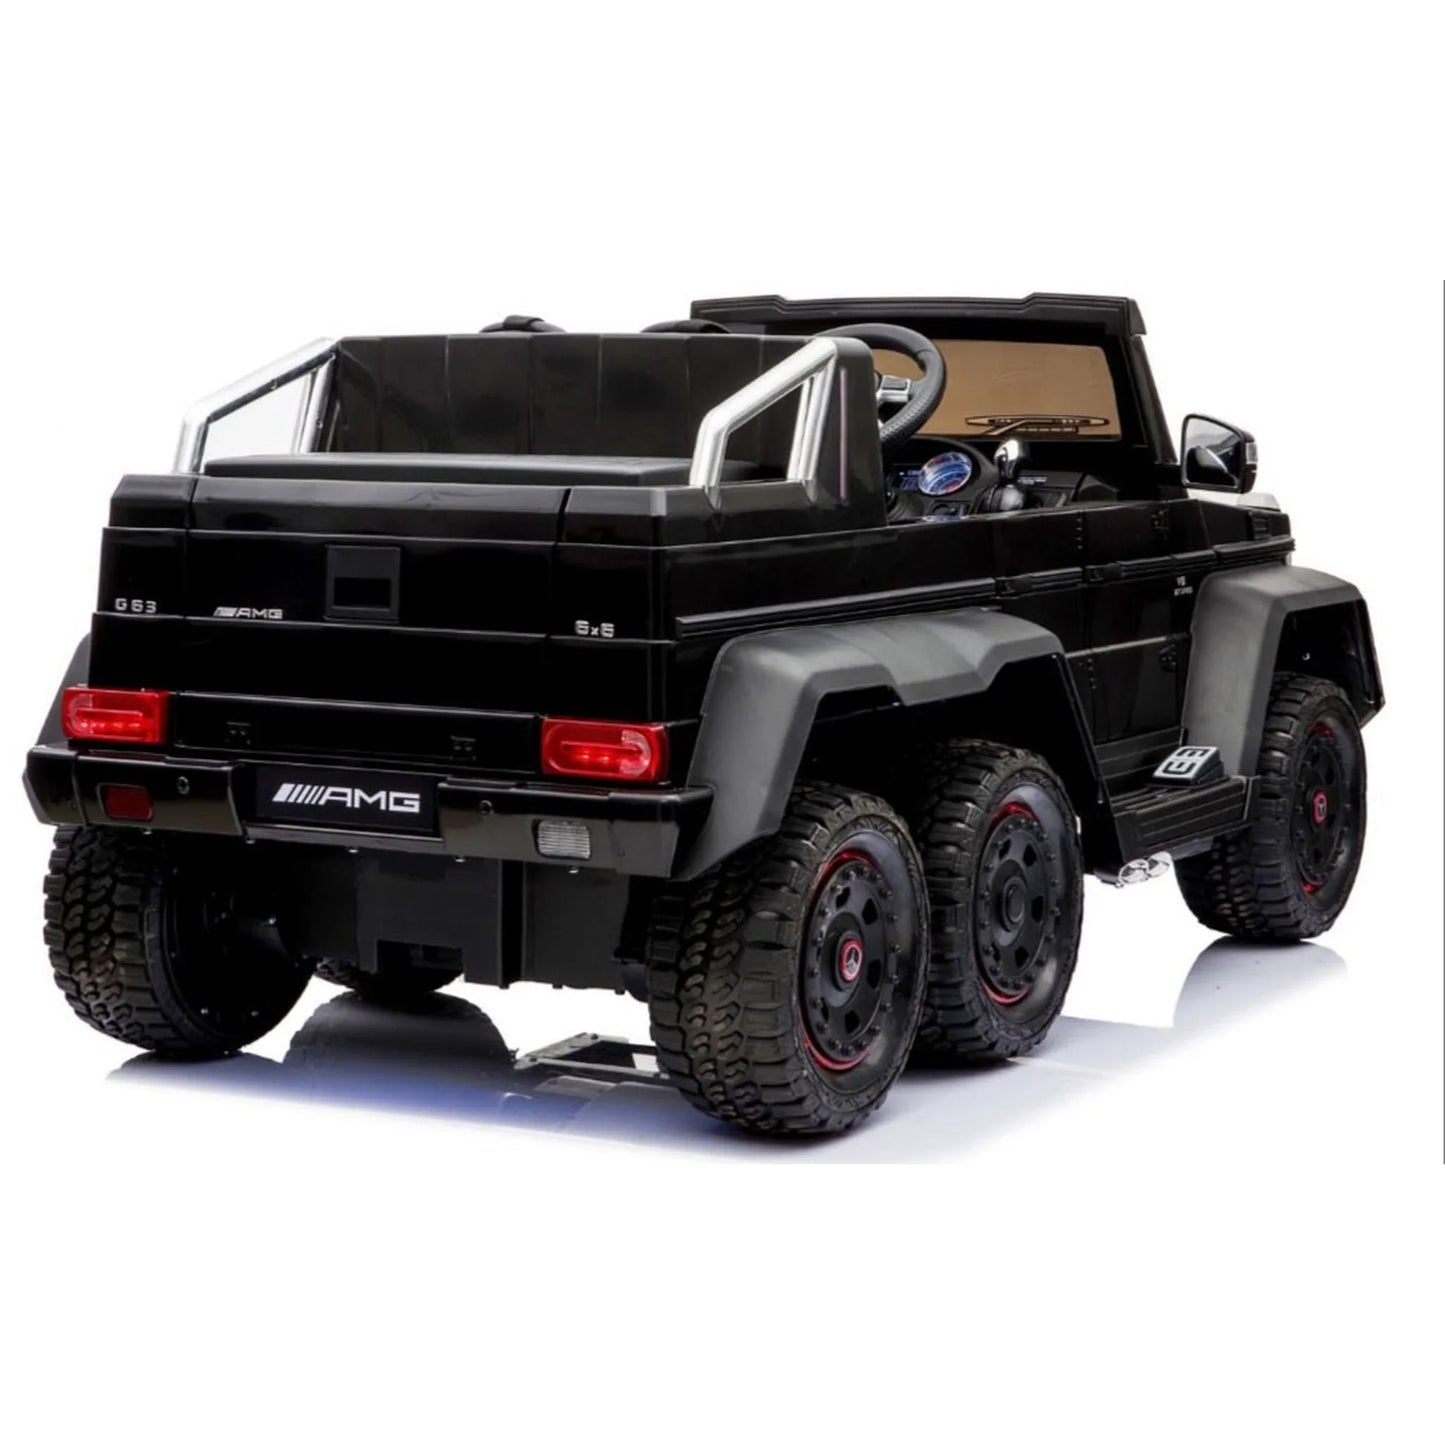 Black six-wheeled Mercedes G65 electric ride-on toy for children, rear view